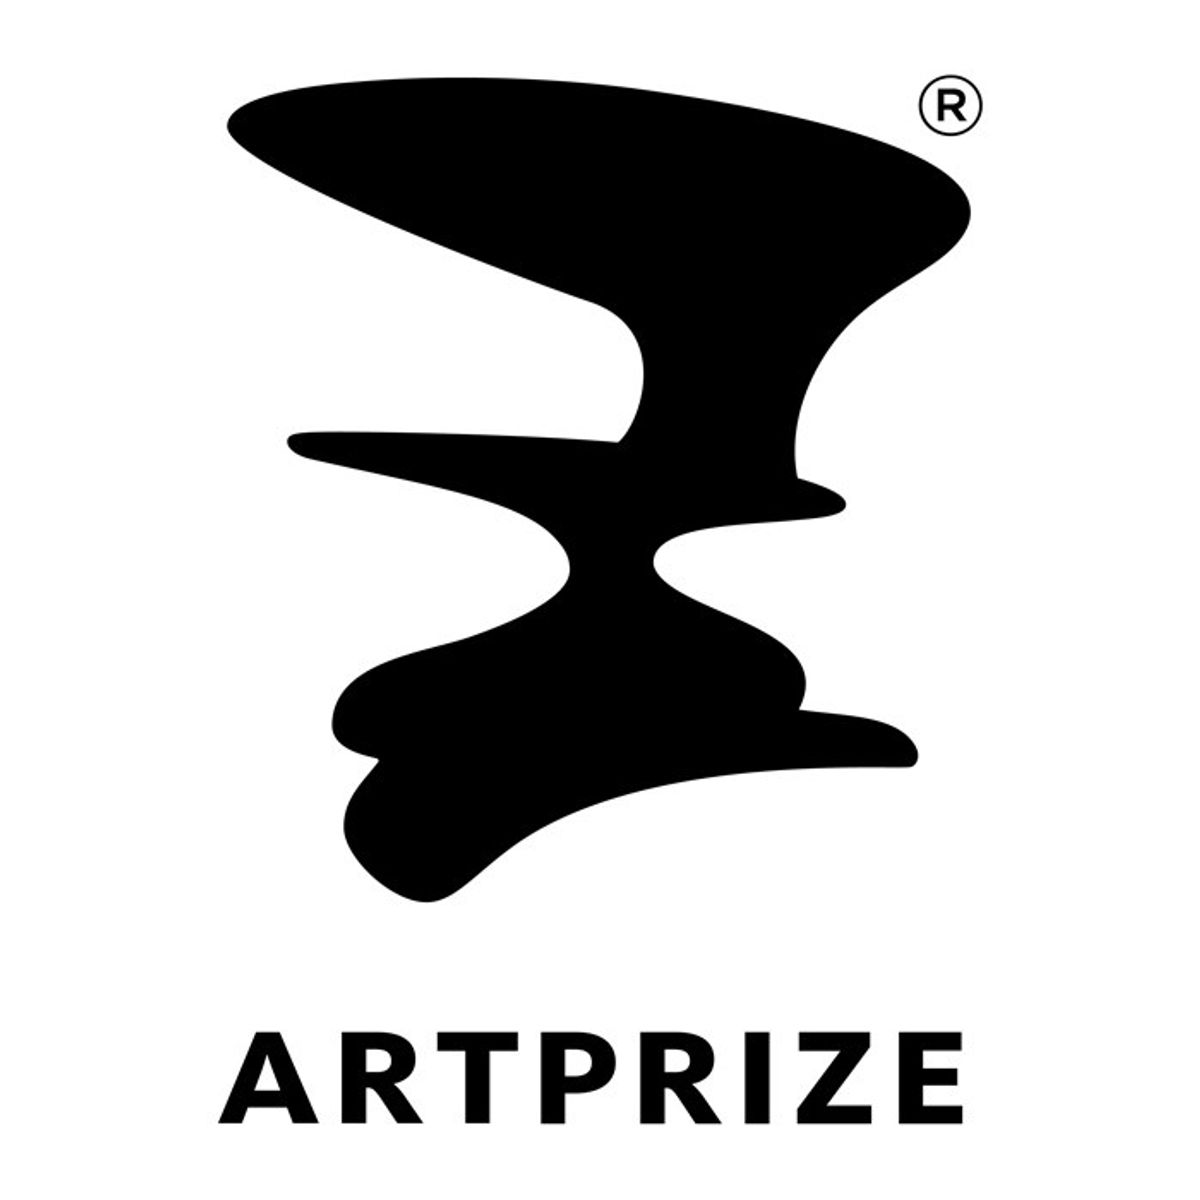 Why We Should Have ArtPrize In Every Downtown